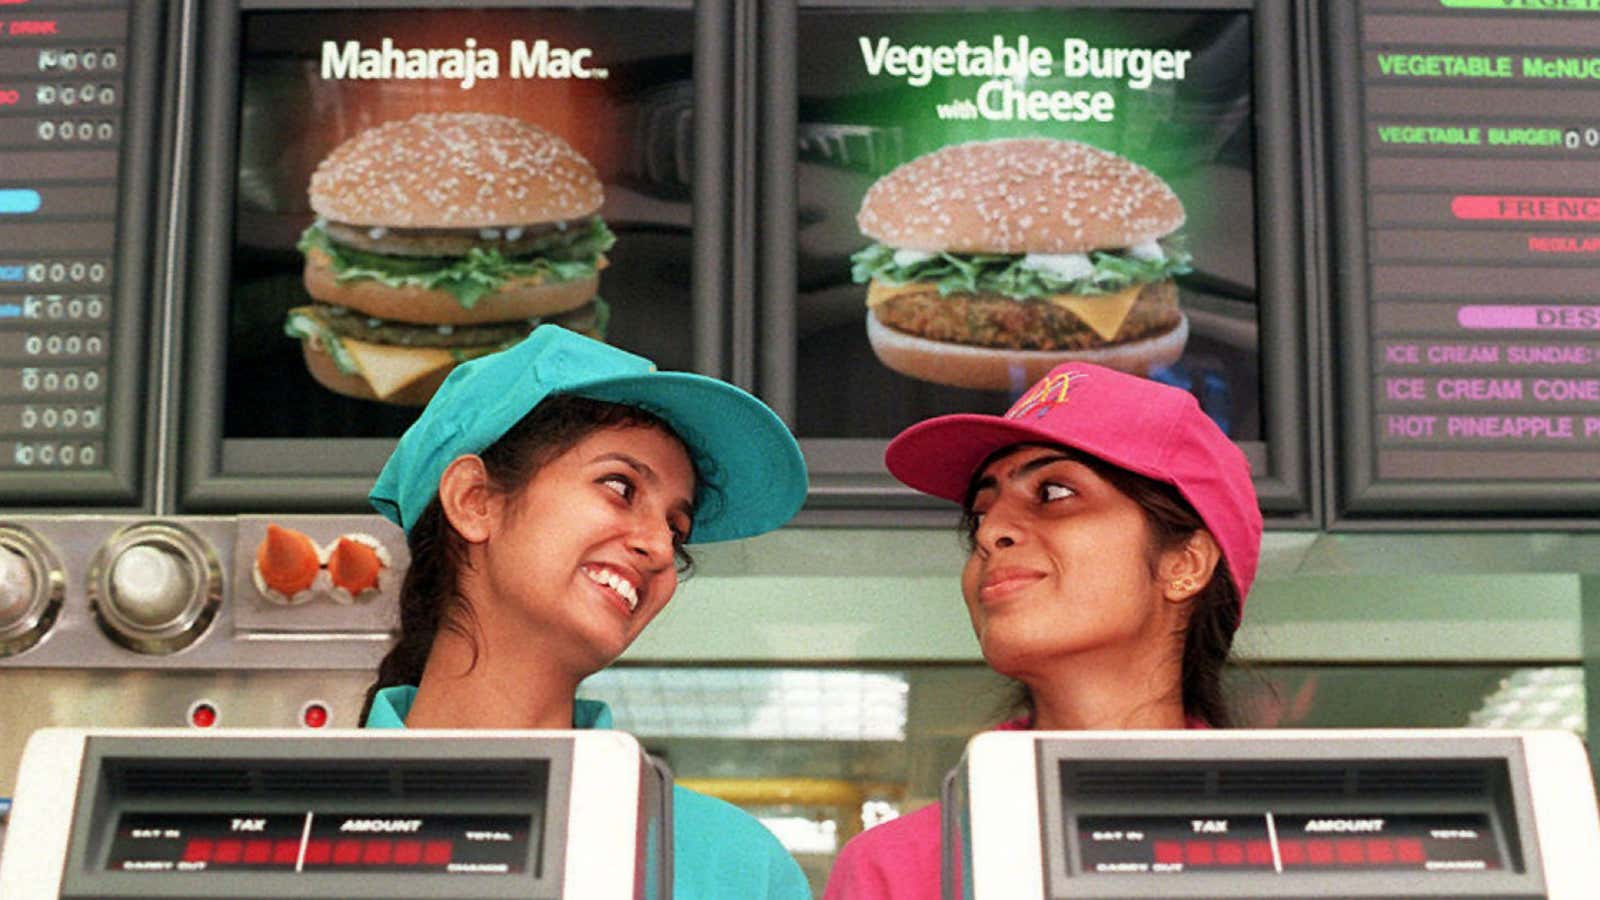 Mcdonald’s spent millions building its brand in India and has figured out ways to profit from even the lowest-priced items.